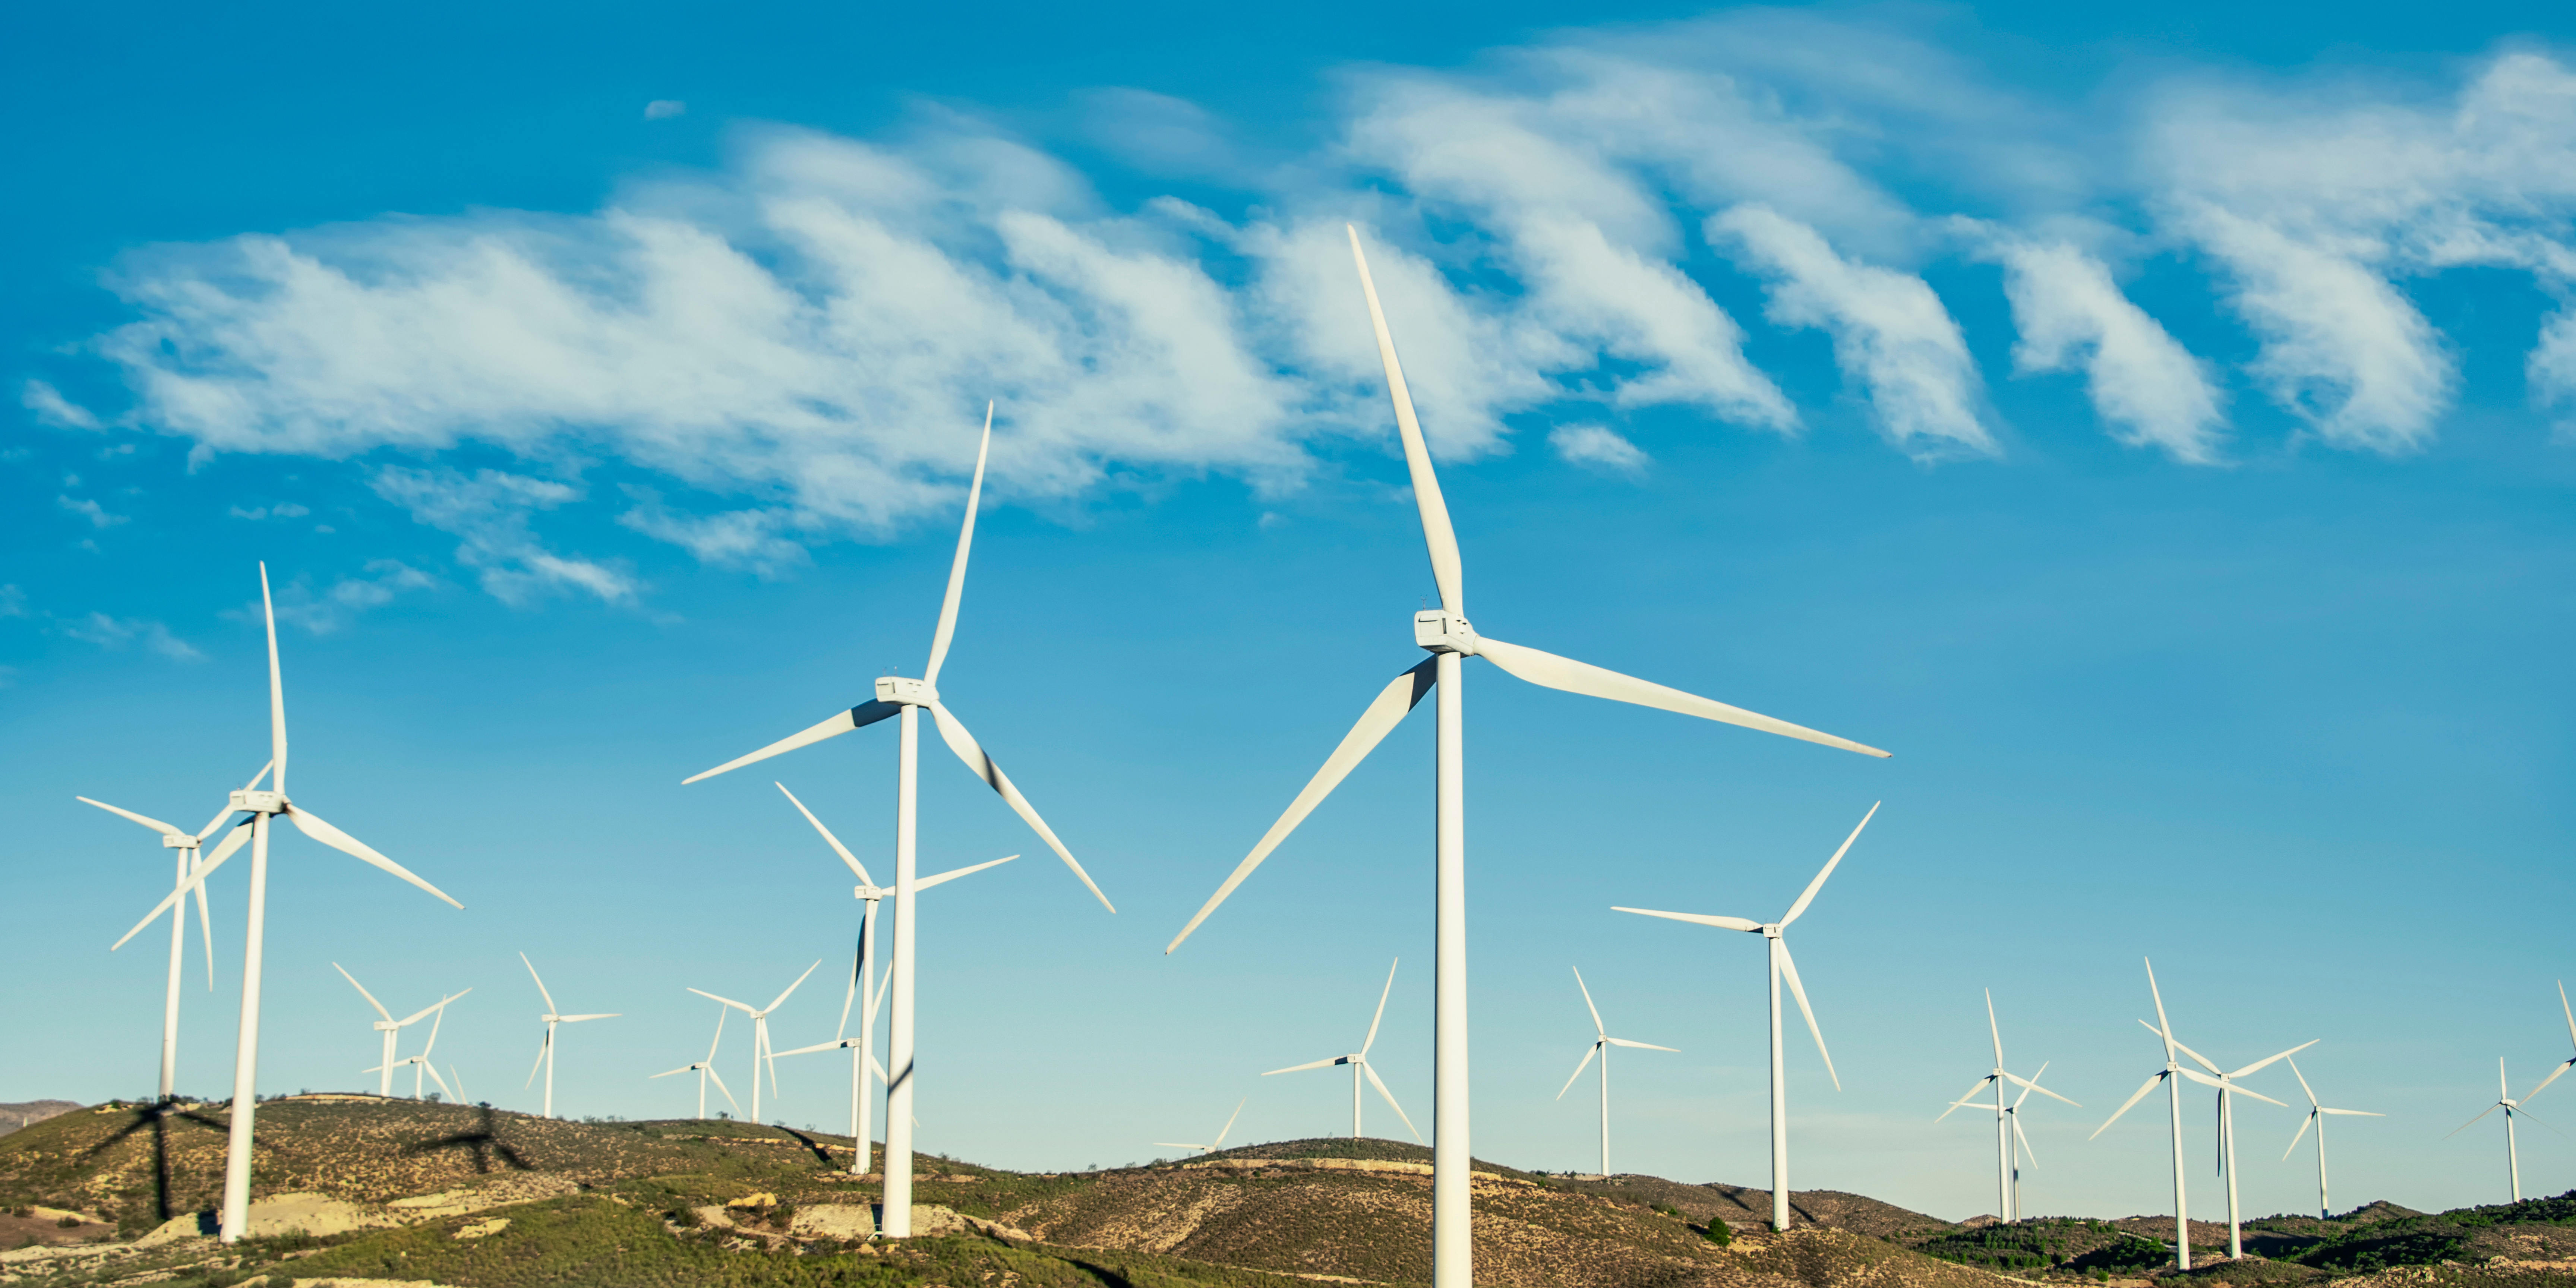 A QUICK INTRODUCTION TO THE WIND POWER MARKET